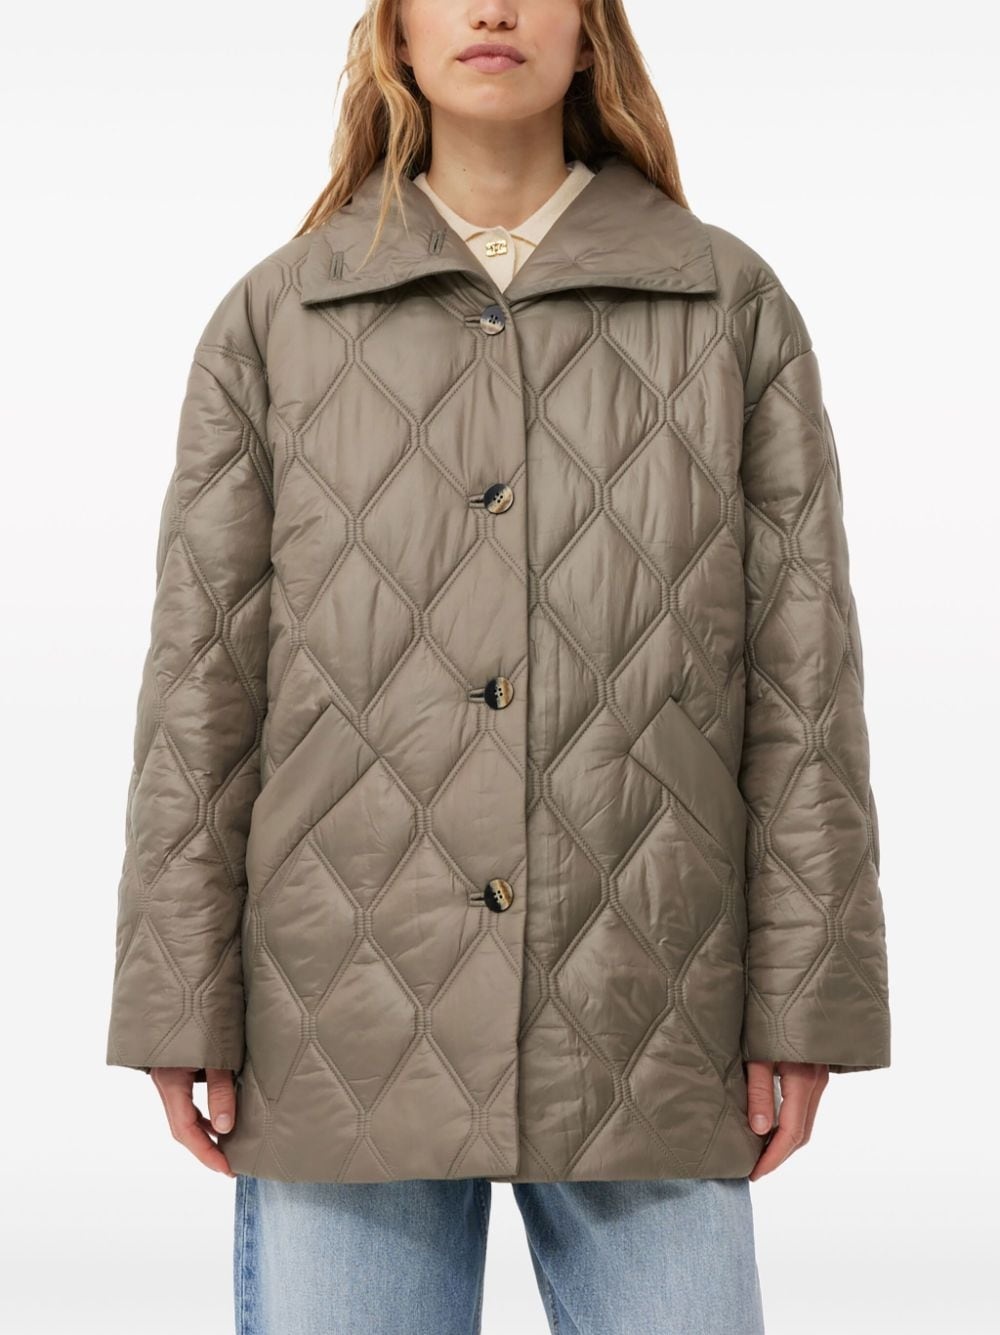 high-shine finish quilted jacket - 5